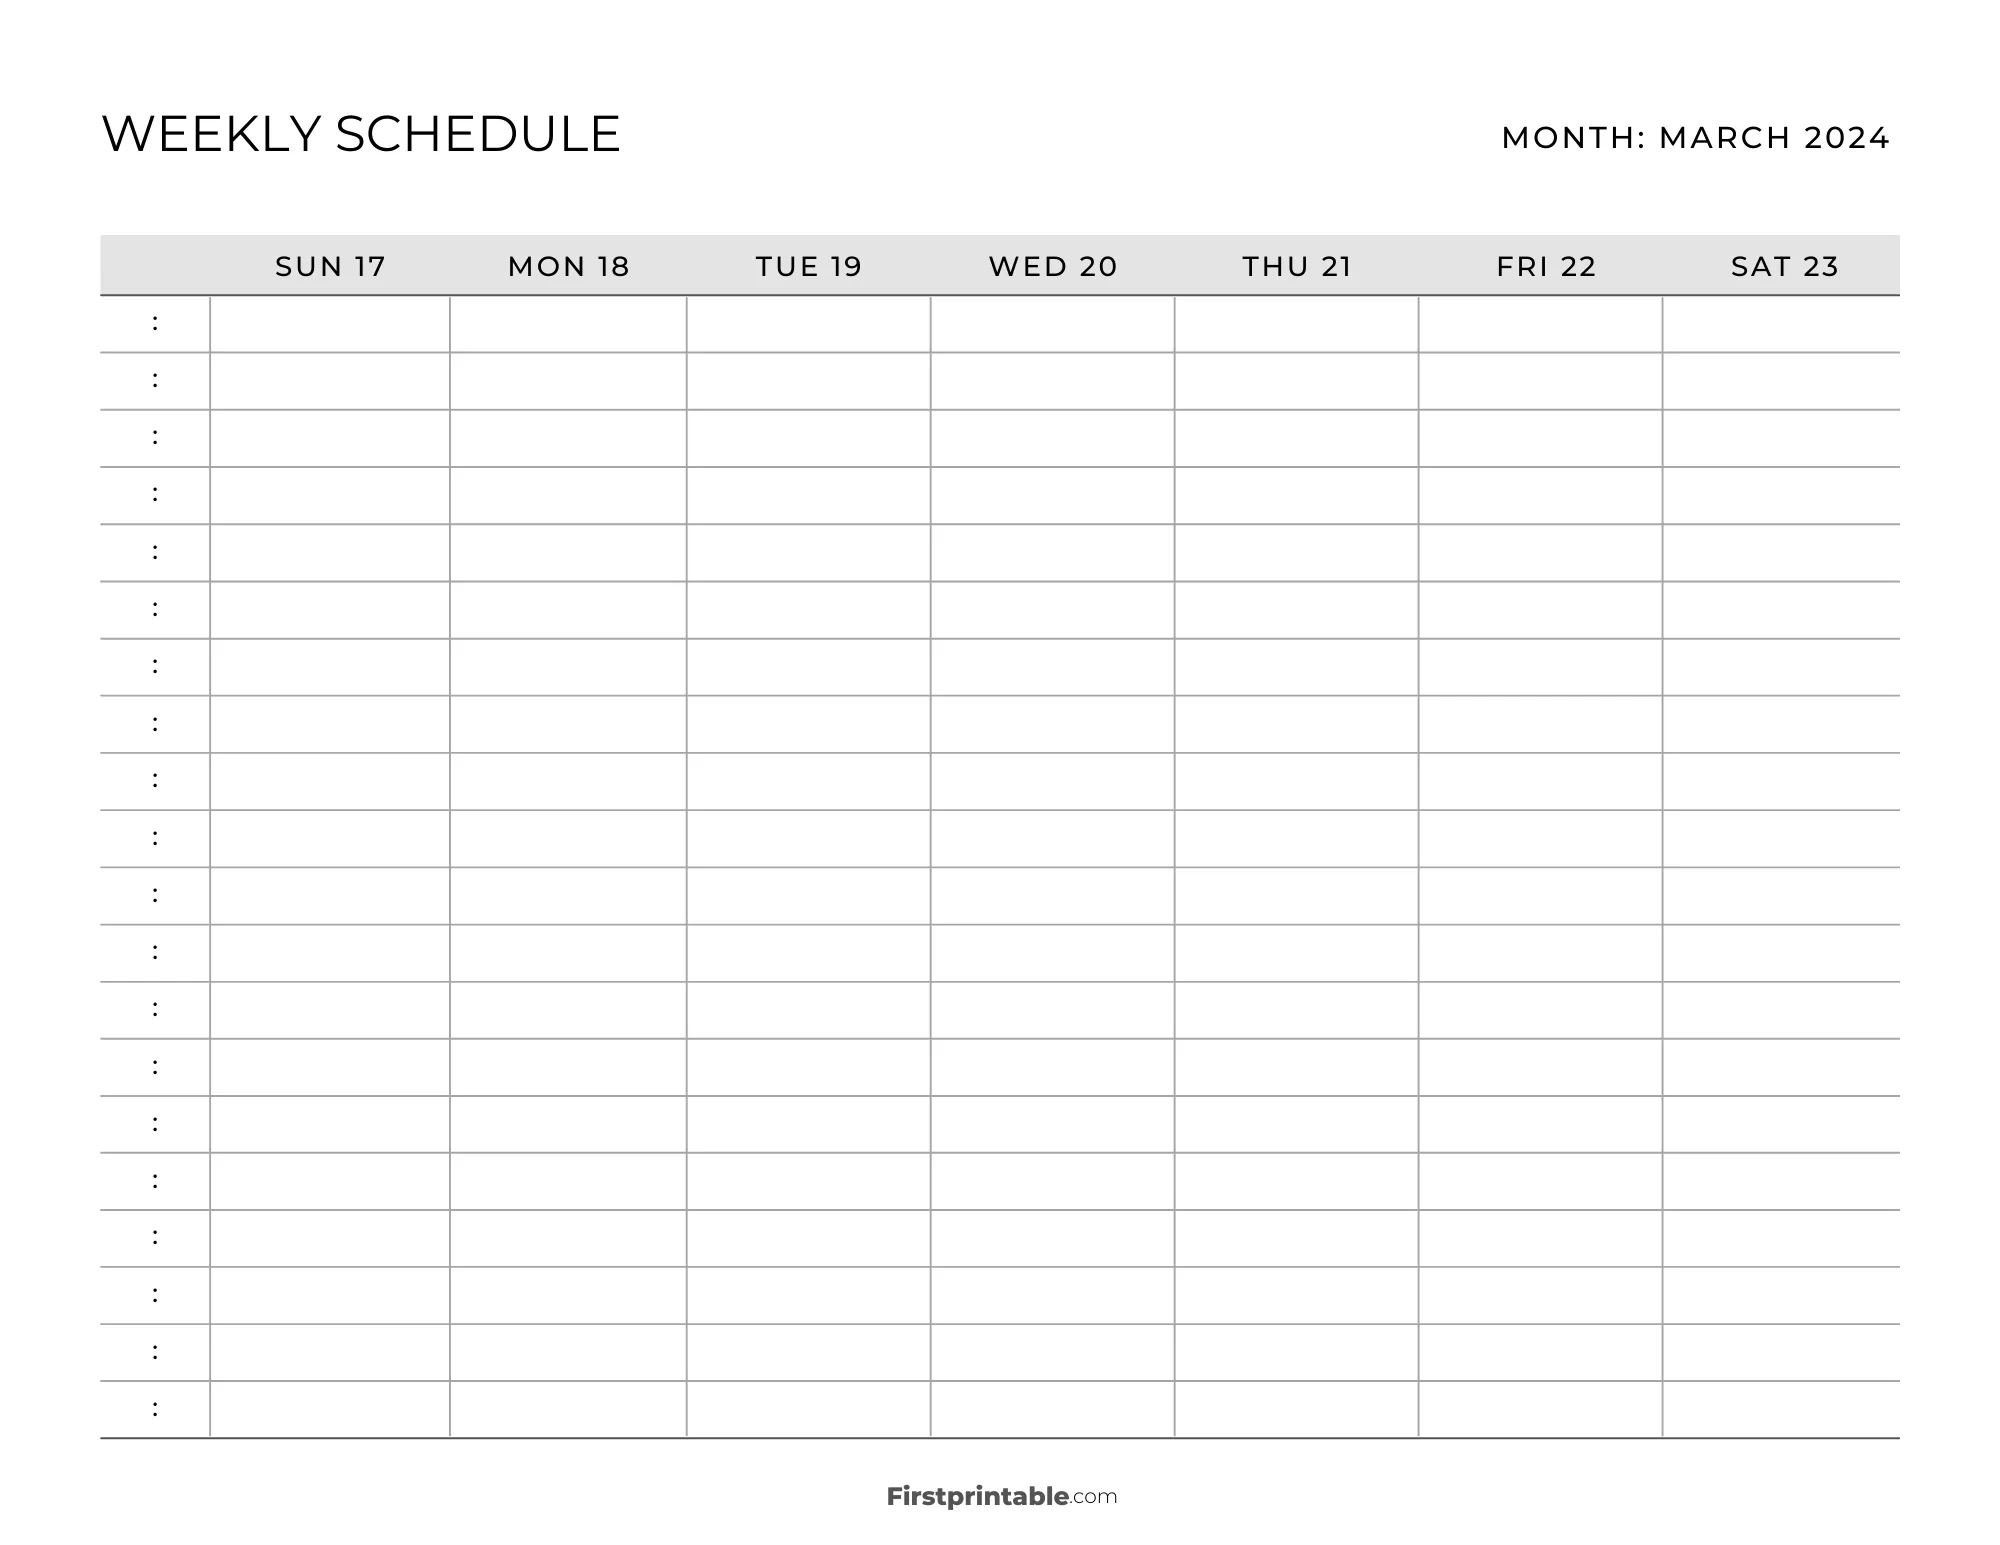 March 2024 Printable Weekly Schedule Template 05 - Grey